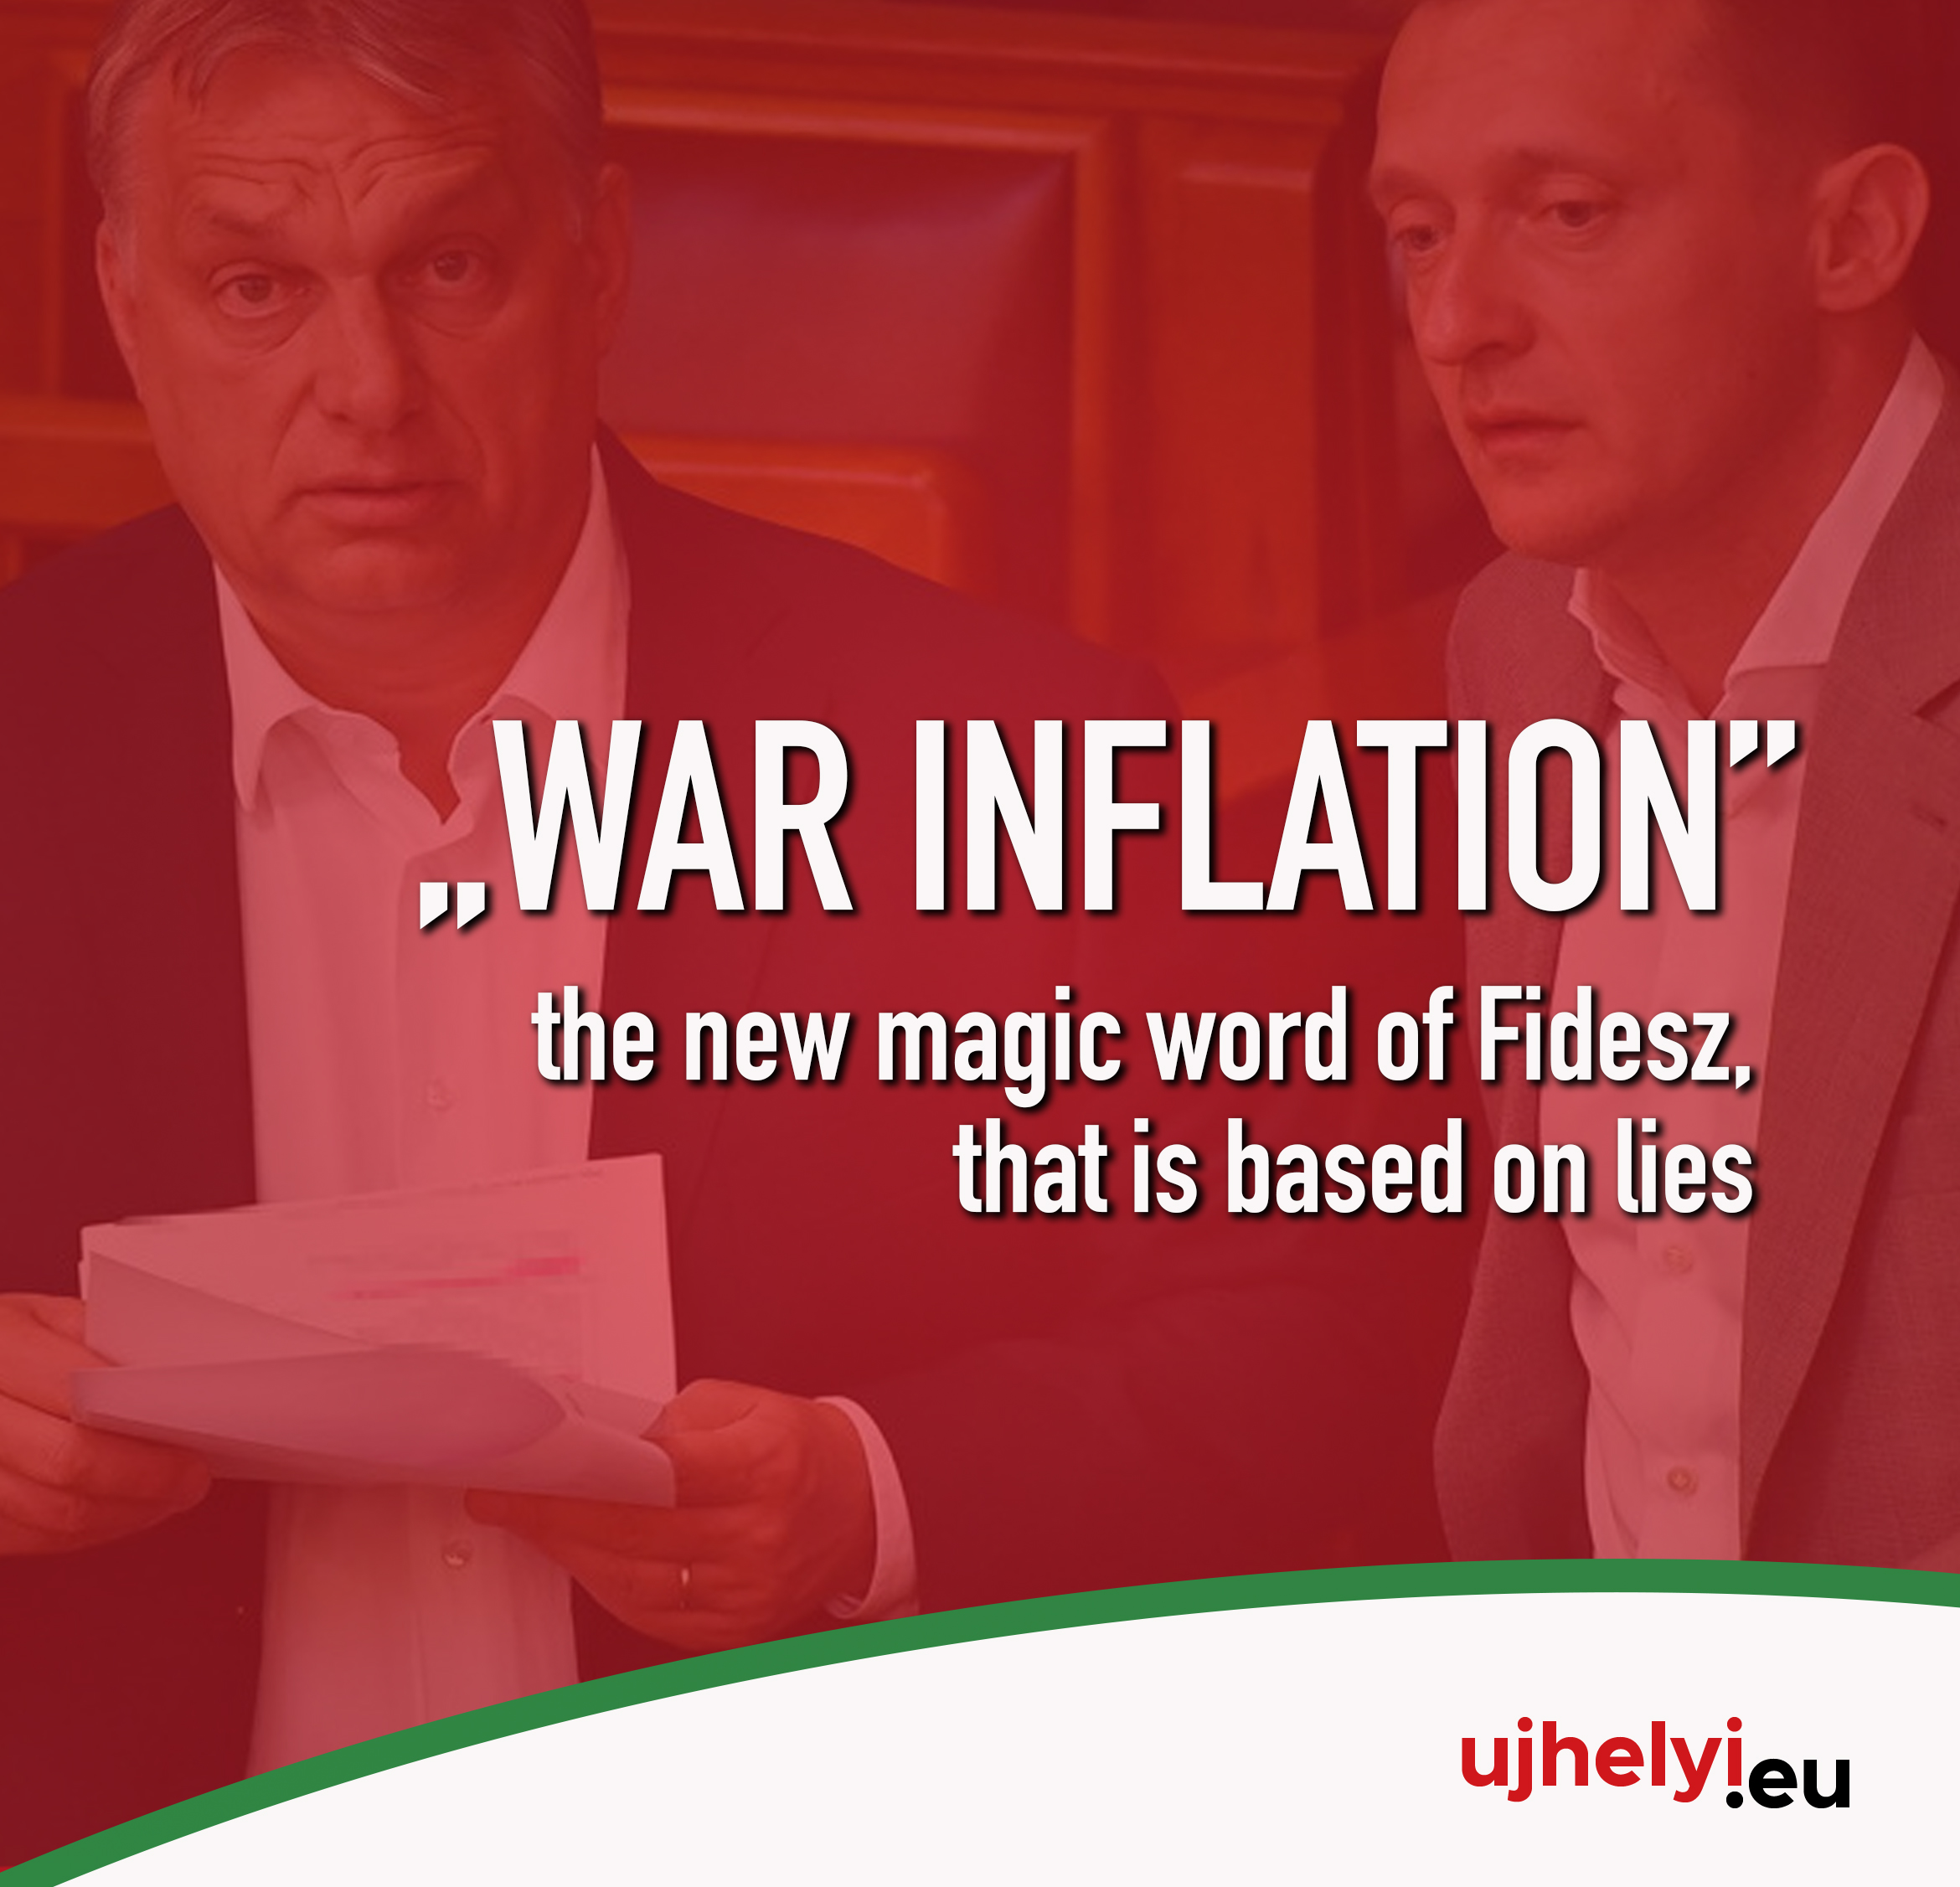 Fidesz Factually Lying about „War Inflation”